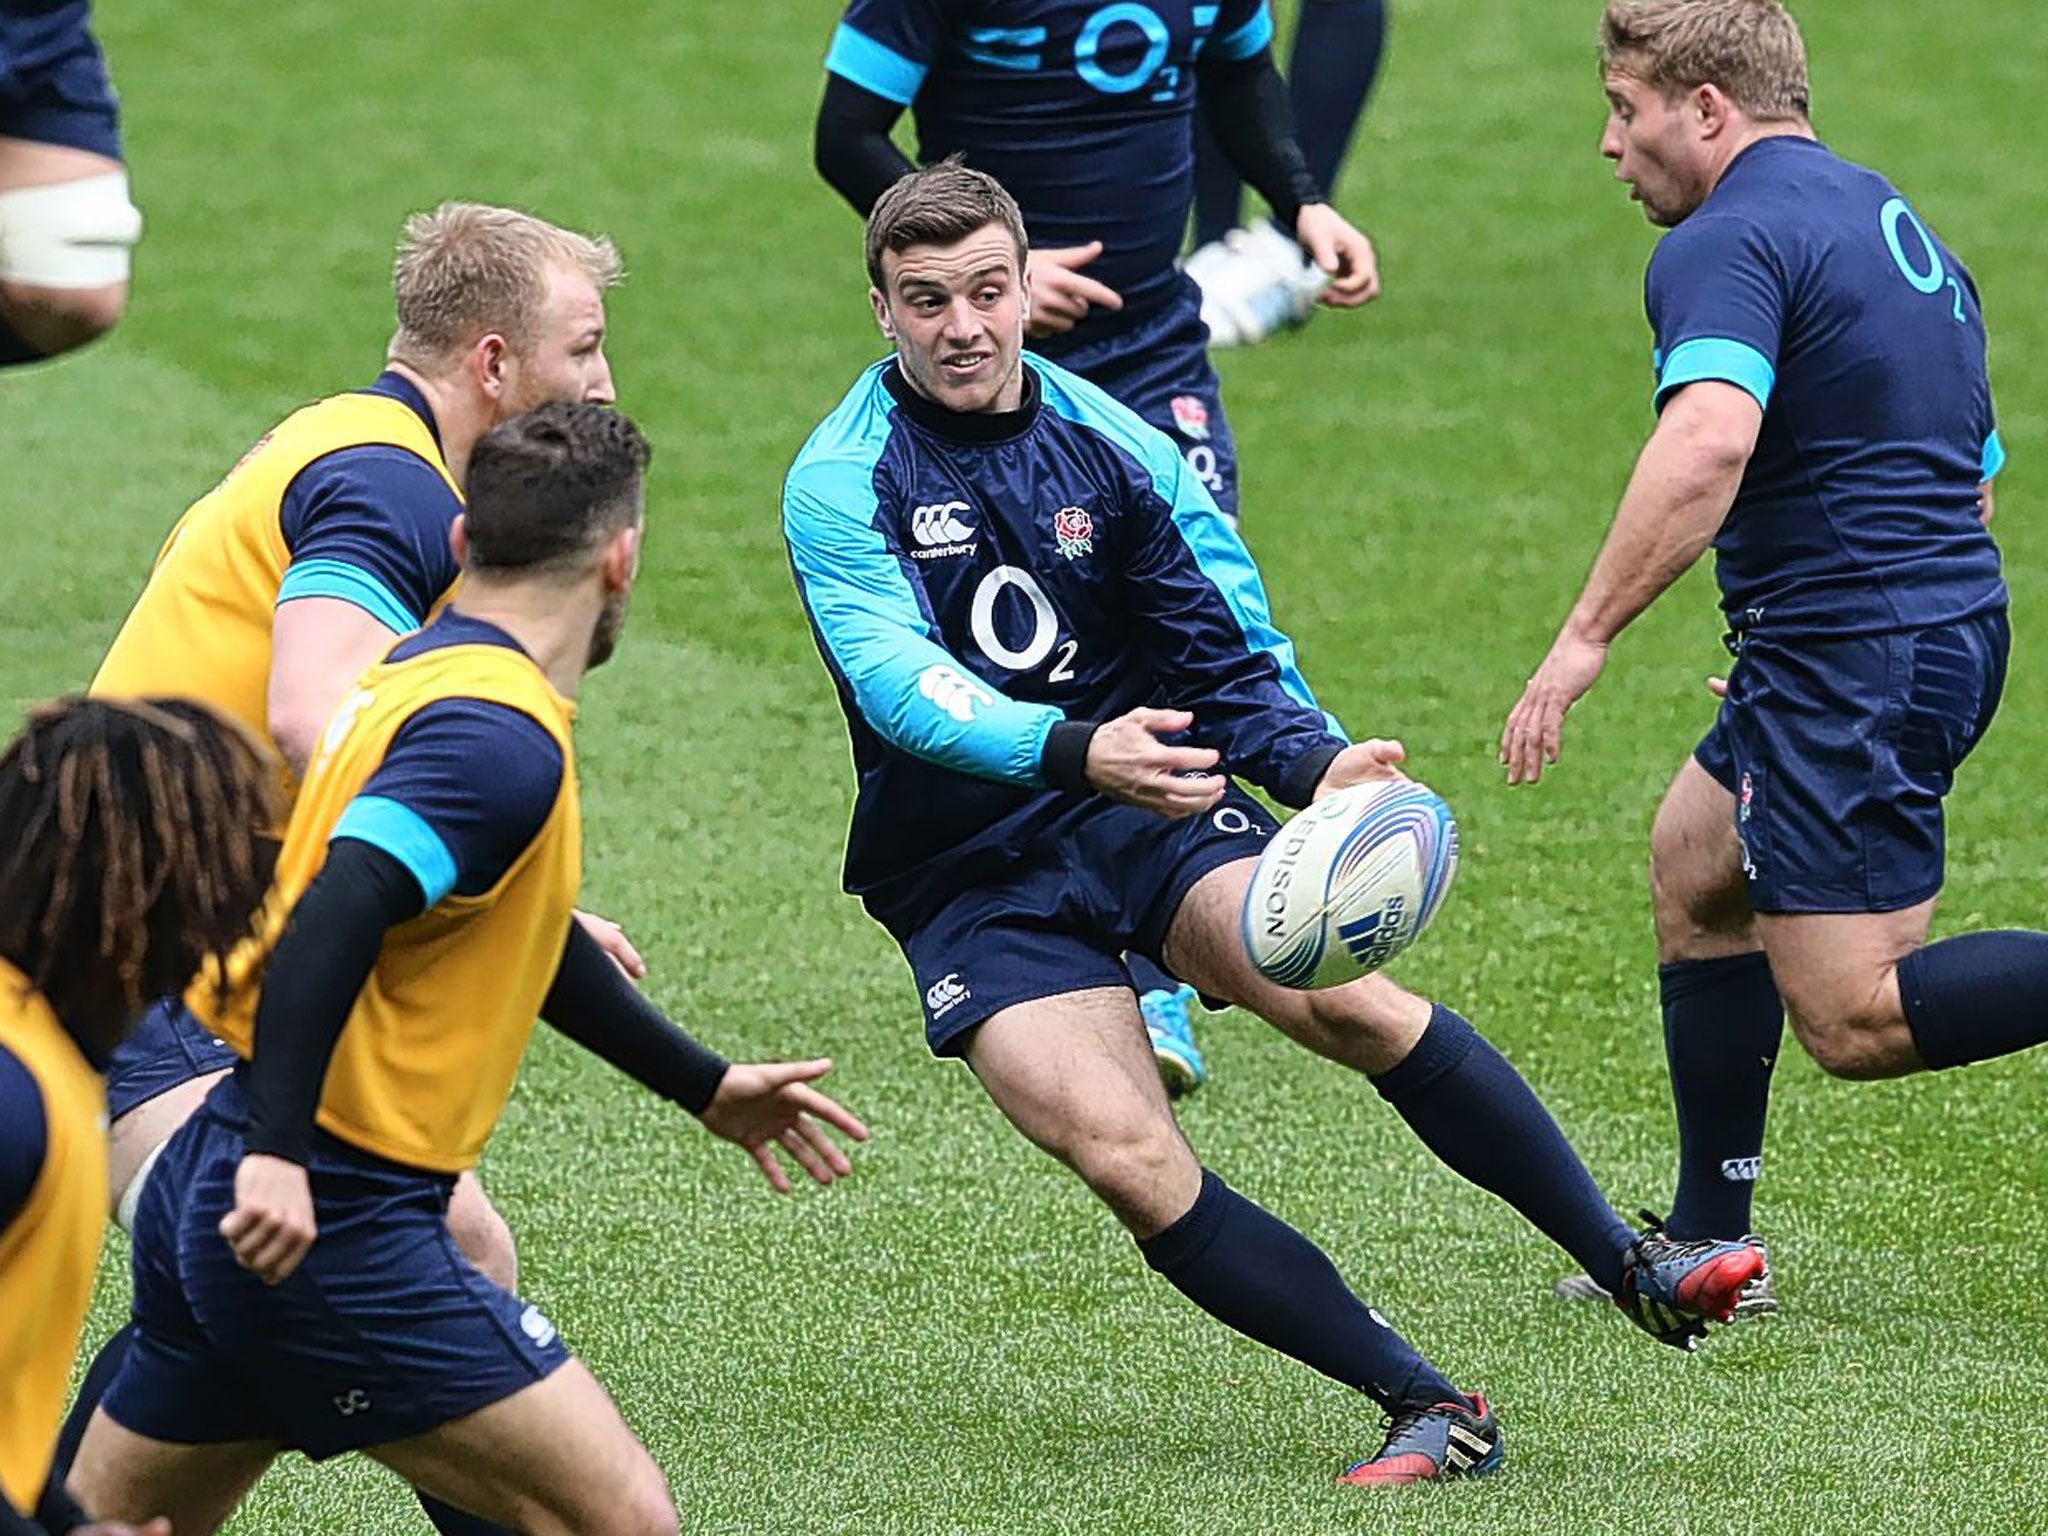 Bath fly-half George Ford trains with England. I would like to see him start against Italy to gain some experience before the New Zealand tour